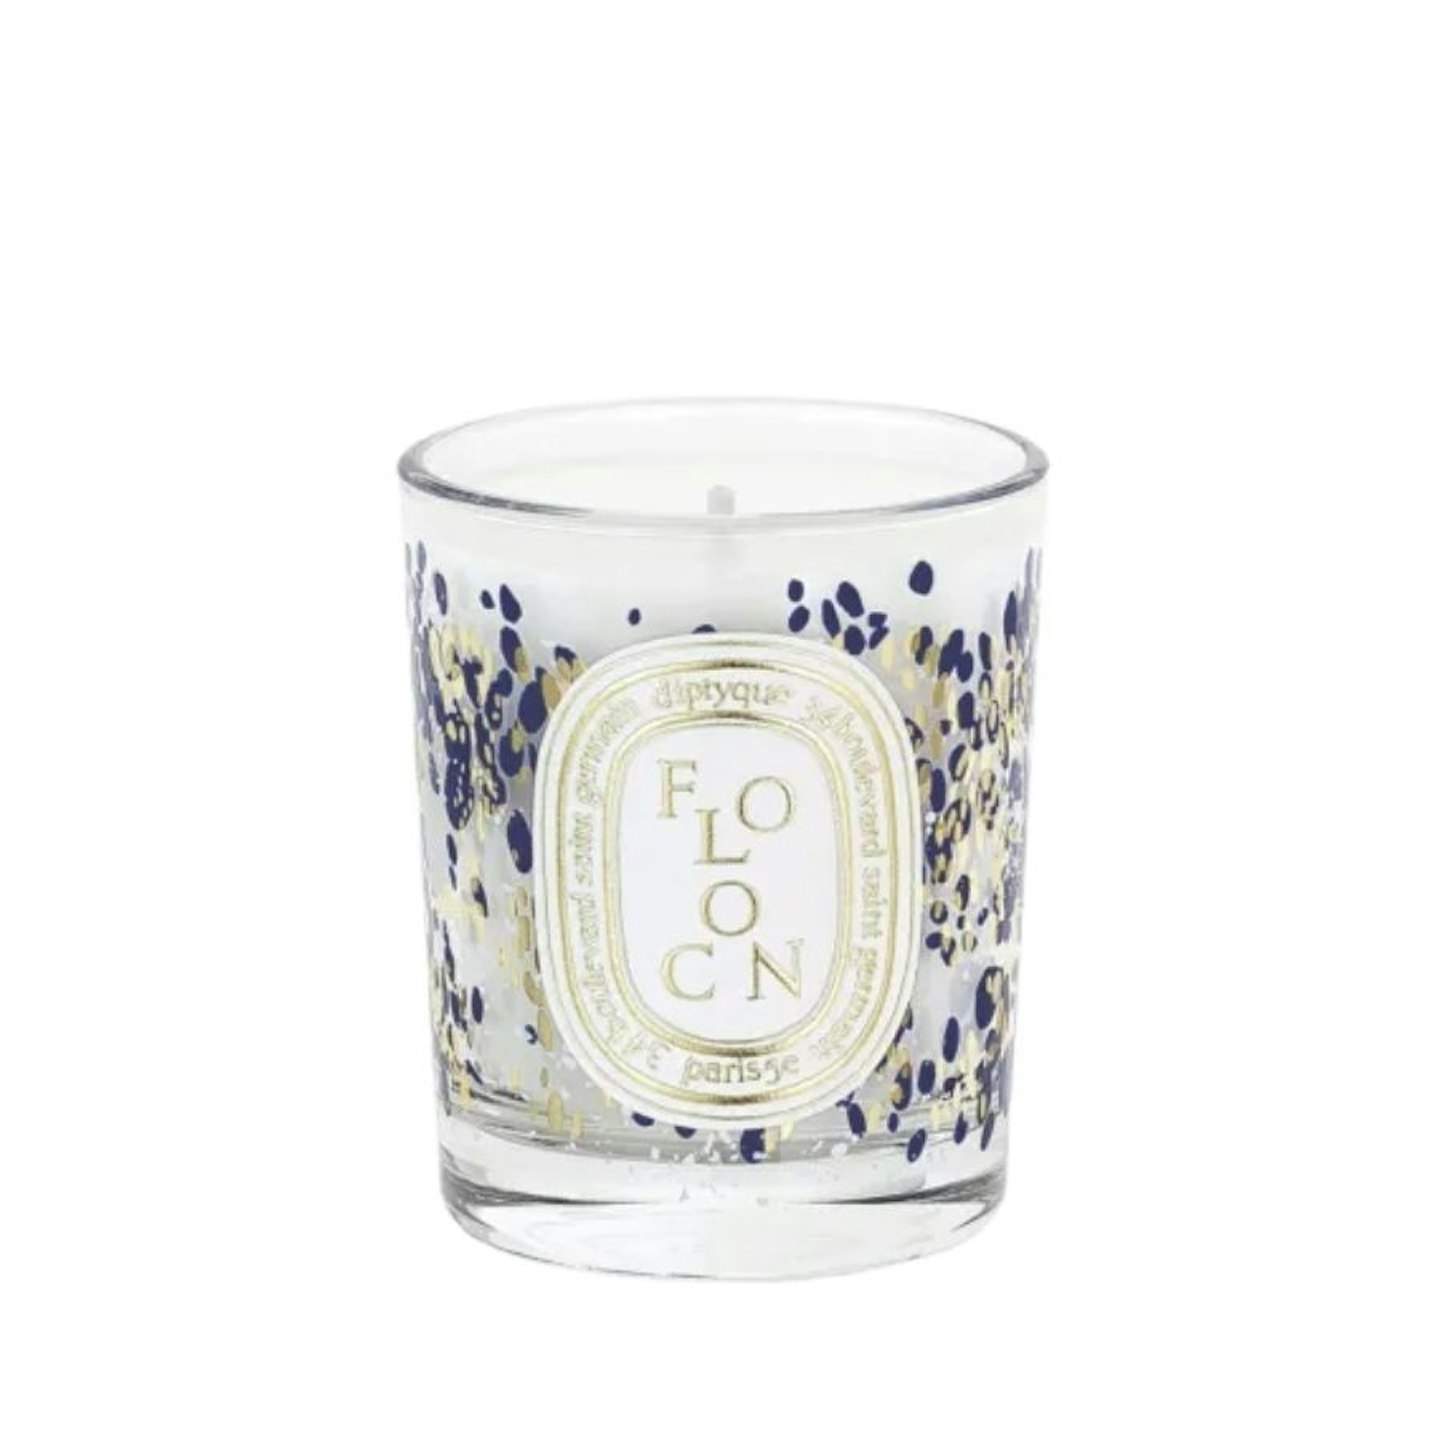 Flocon / Snowflake Candle - Limited Edition - 70g